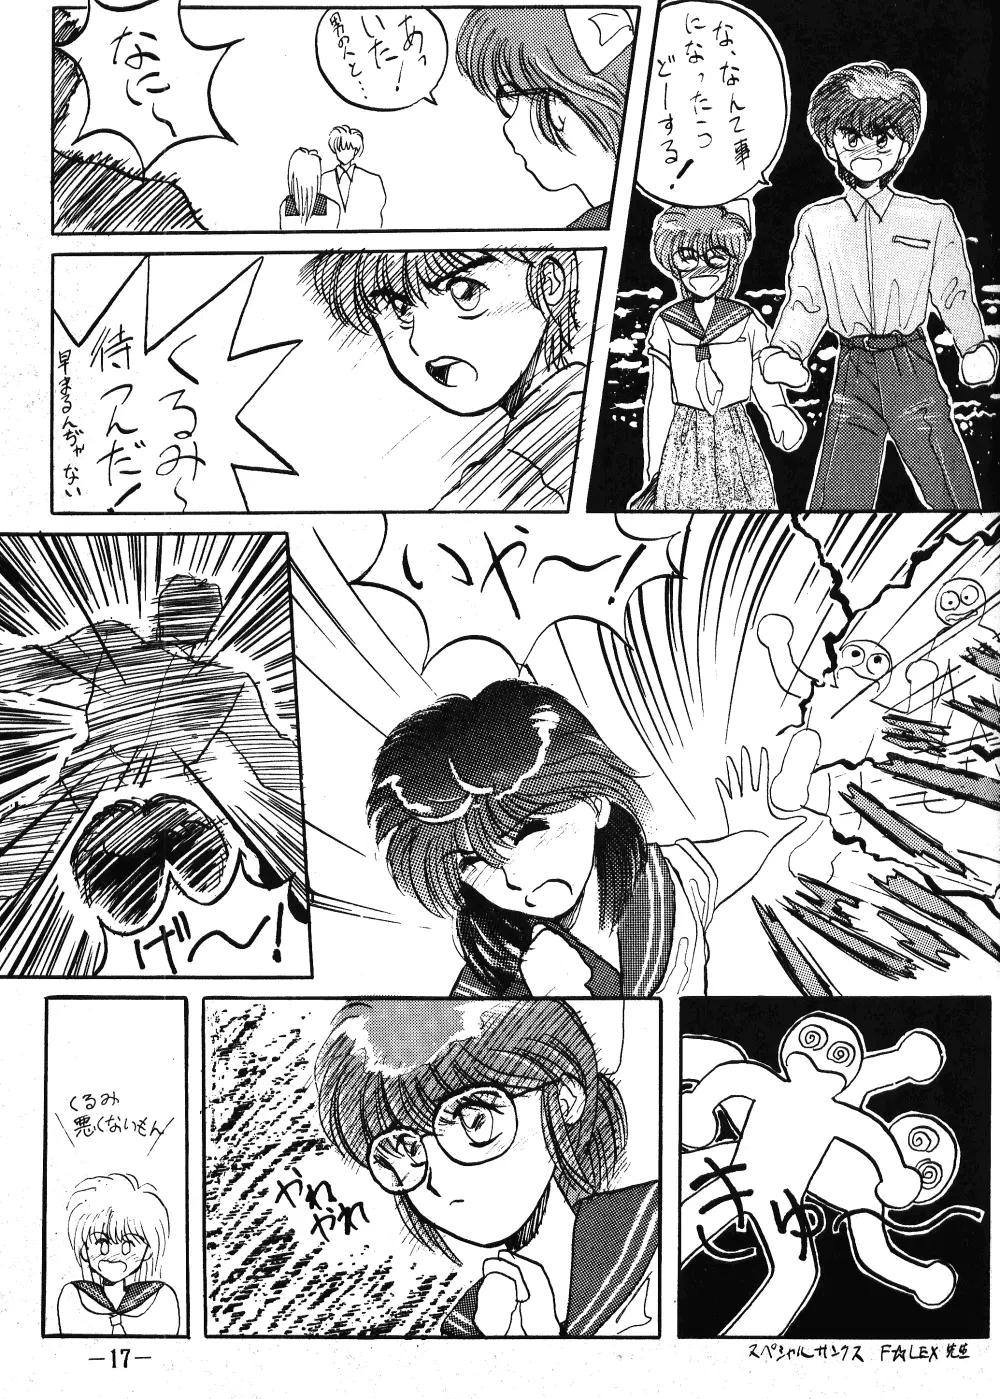 Fro2 Fight Vol. 1 Page.17